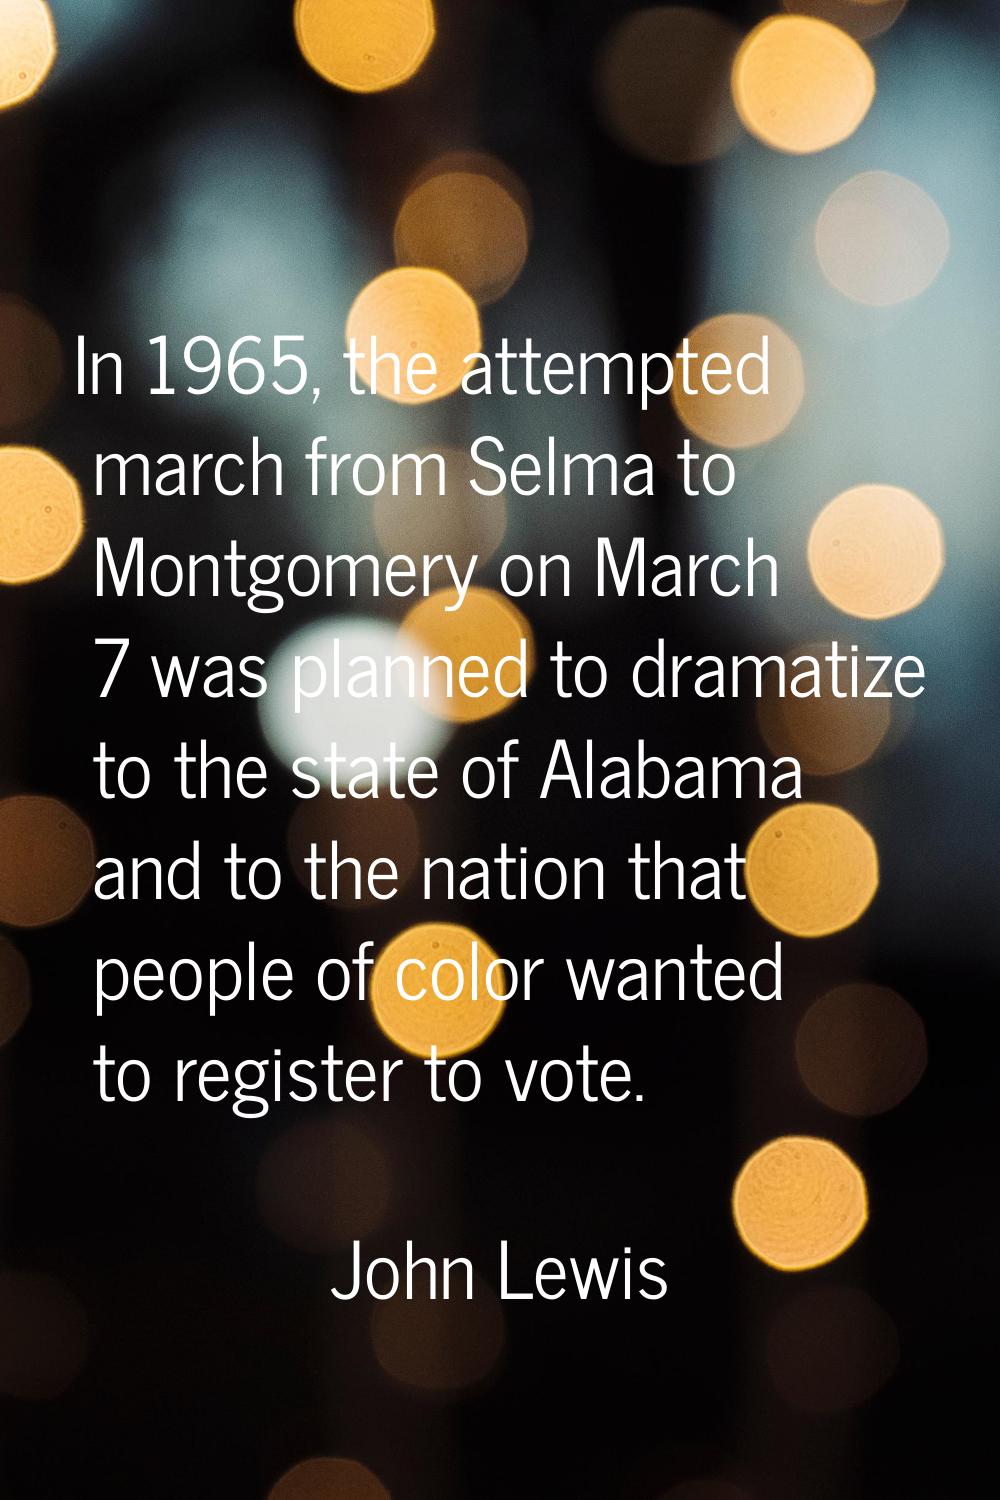 In 1965, the attempted march from Selma to Montgomery on March 7 was planned to dramatize to the st